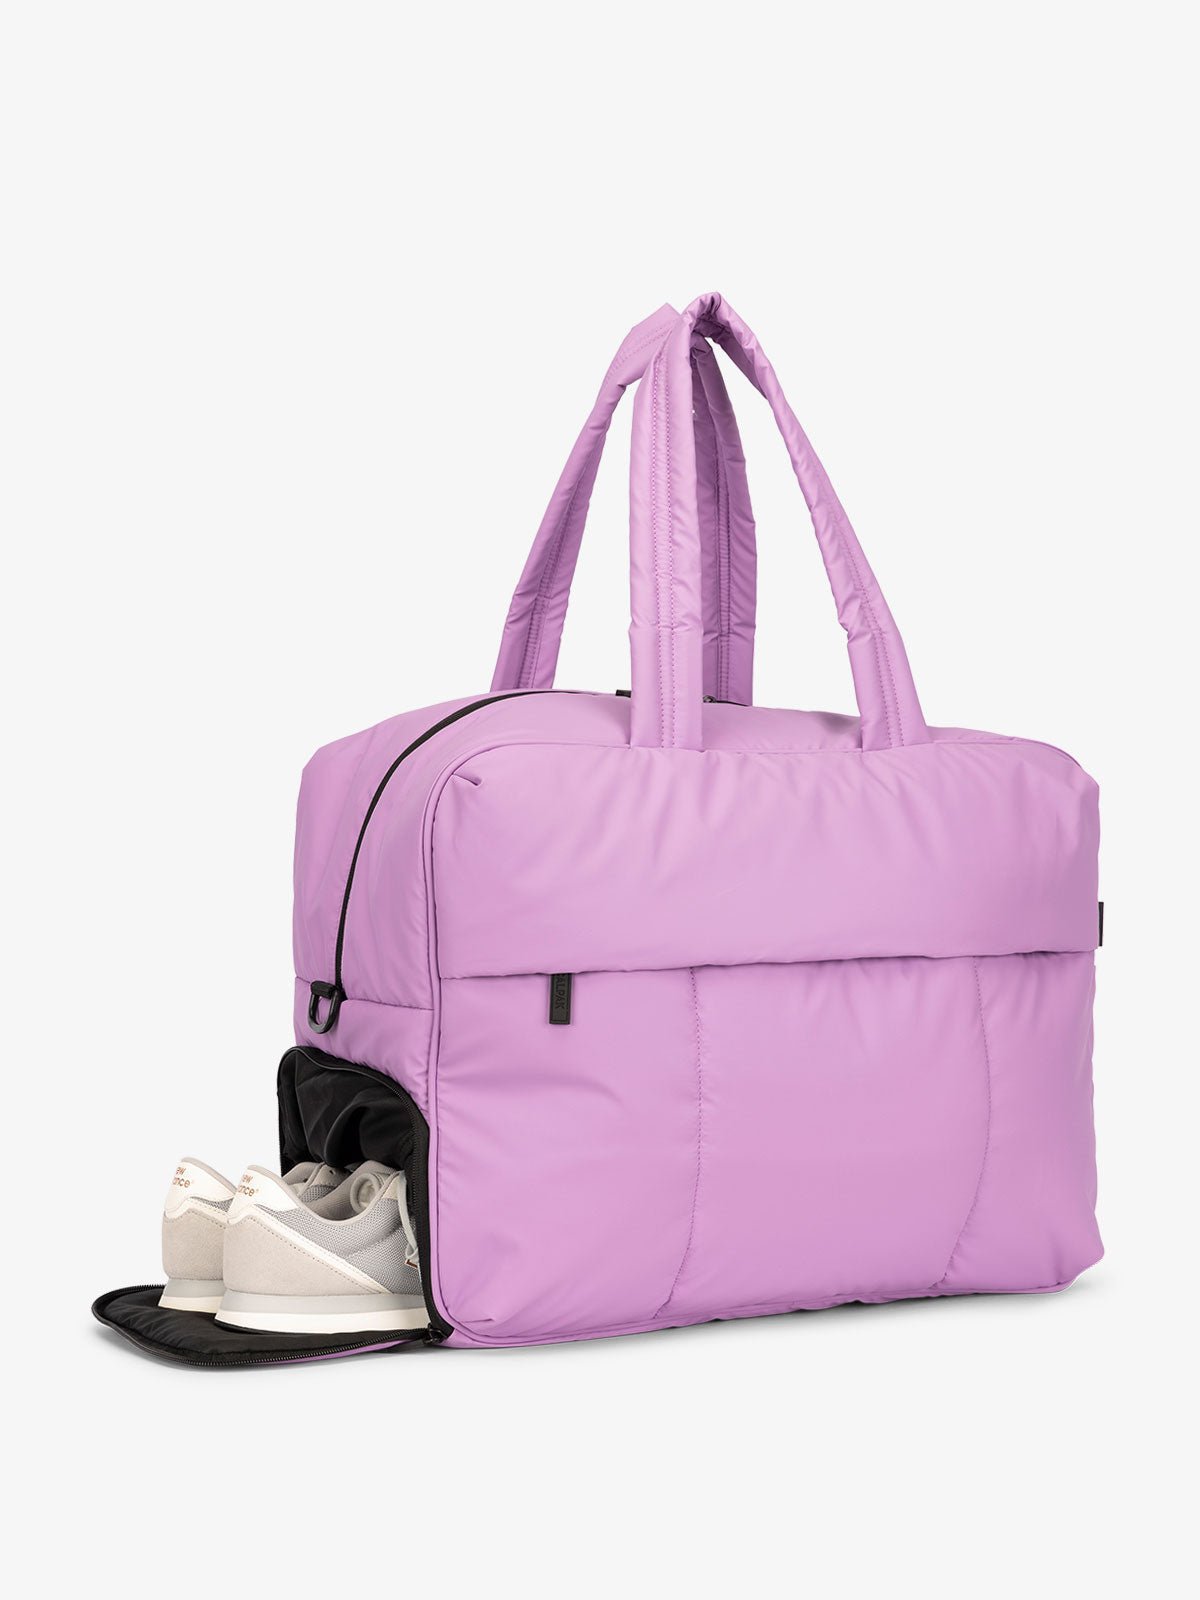 CALPAK Luka large duffel bag with side shoe compartment and dual handles in light purple lilac